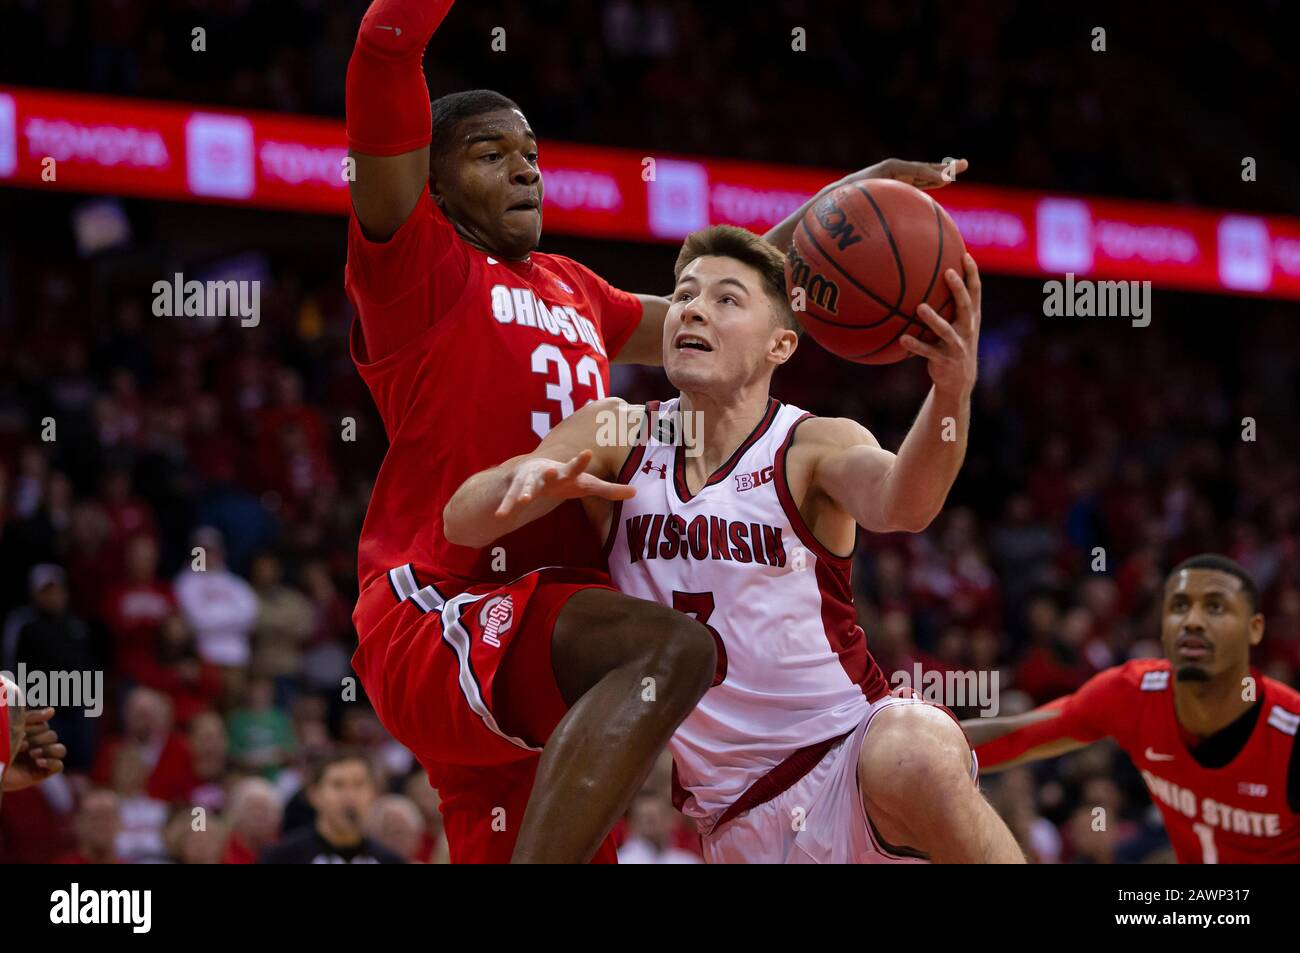 February 9, 2020: Wisconsin Badgers guard Walt McGrory #3 shot is blocked by Ohio State Buckeyes forward E.J. Liddell #32 during the NCAA Basketball game between the Ohio State Buckeyes and the Wisconsin Badgers at the Kohl Center in Madison, WI. John Fisher/CSM Stock Photo